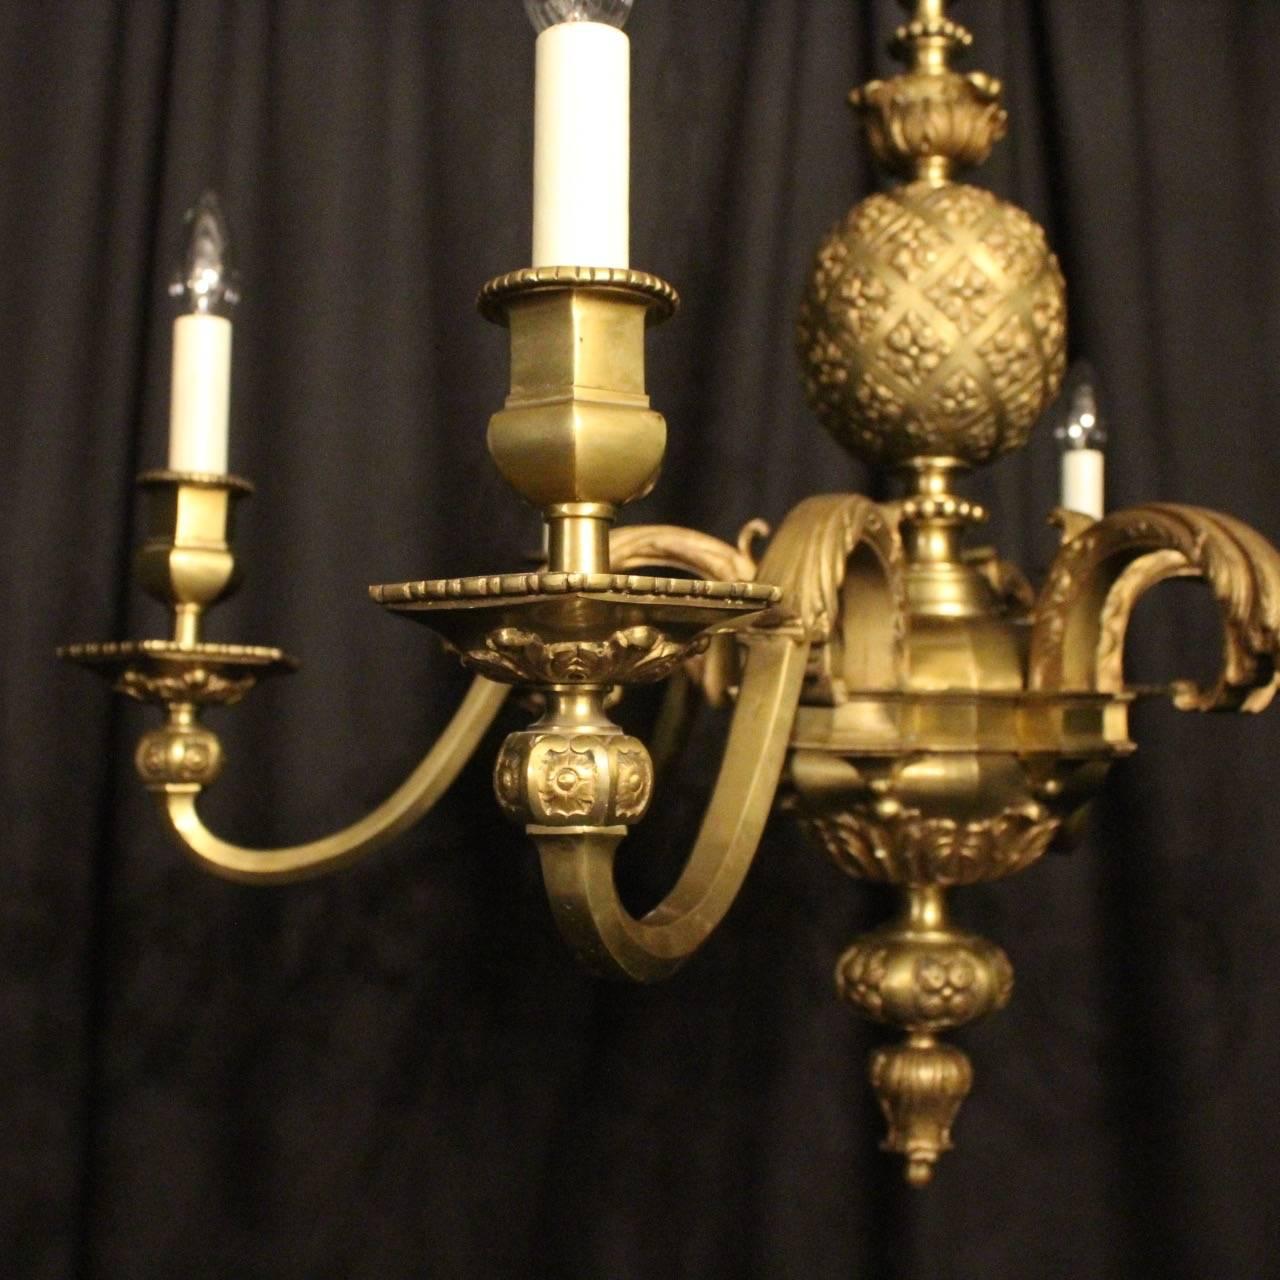 A large French gilded bronze six-light Gothic inspired antique chandelier, the ornately cast scrolling arms with sectional bobeche drip pans and bulbous sectional candle sconces, issuing from a decorative central sectional column with etched bulbous